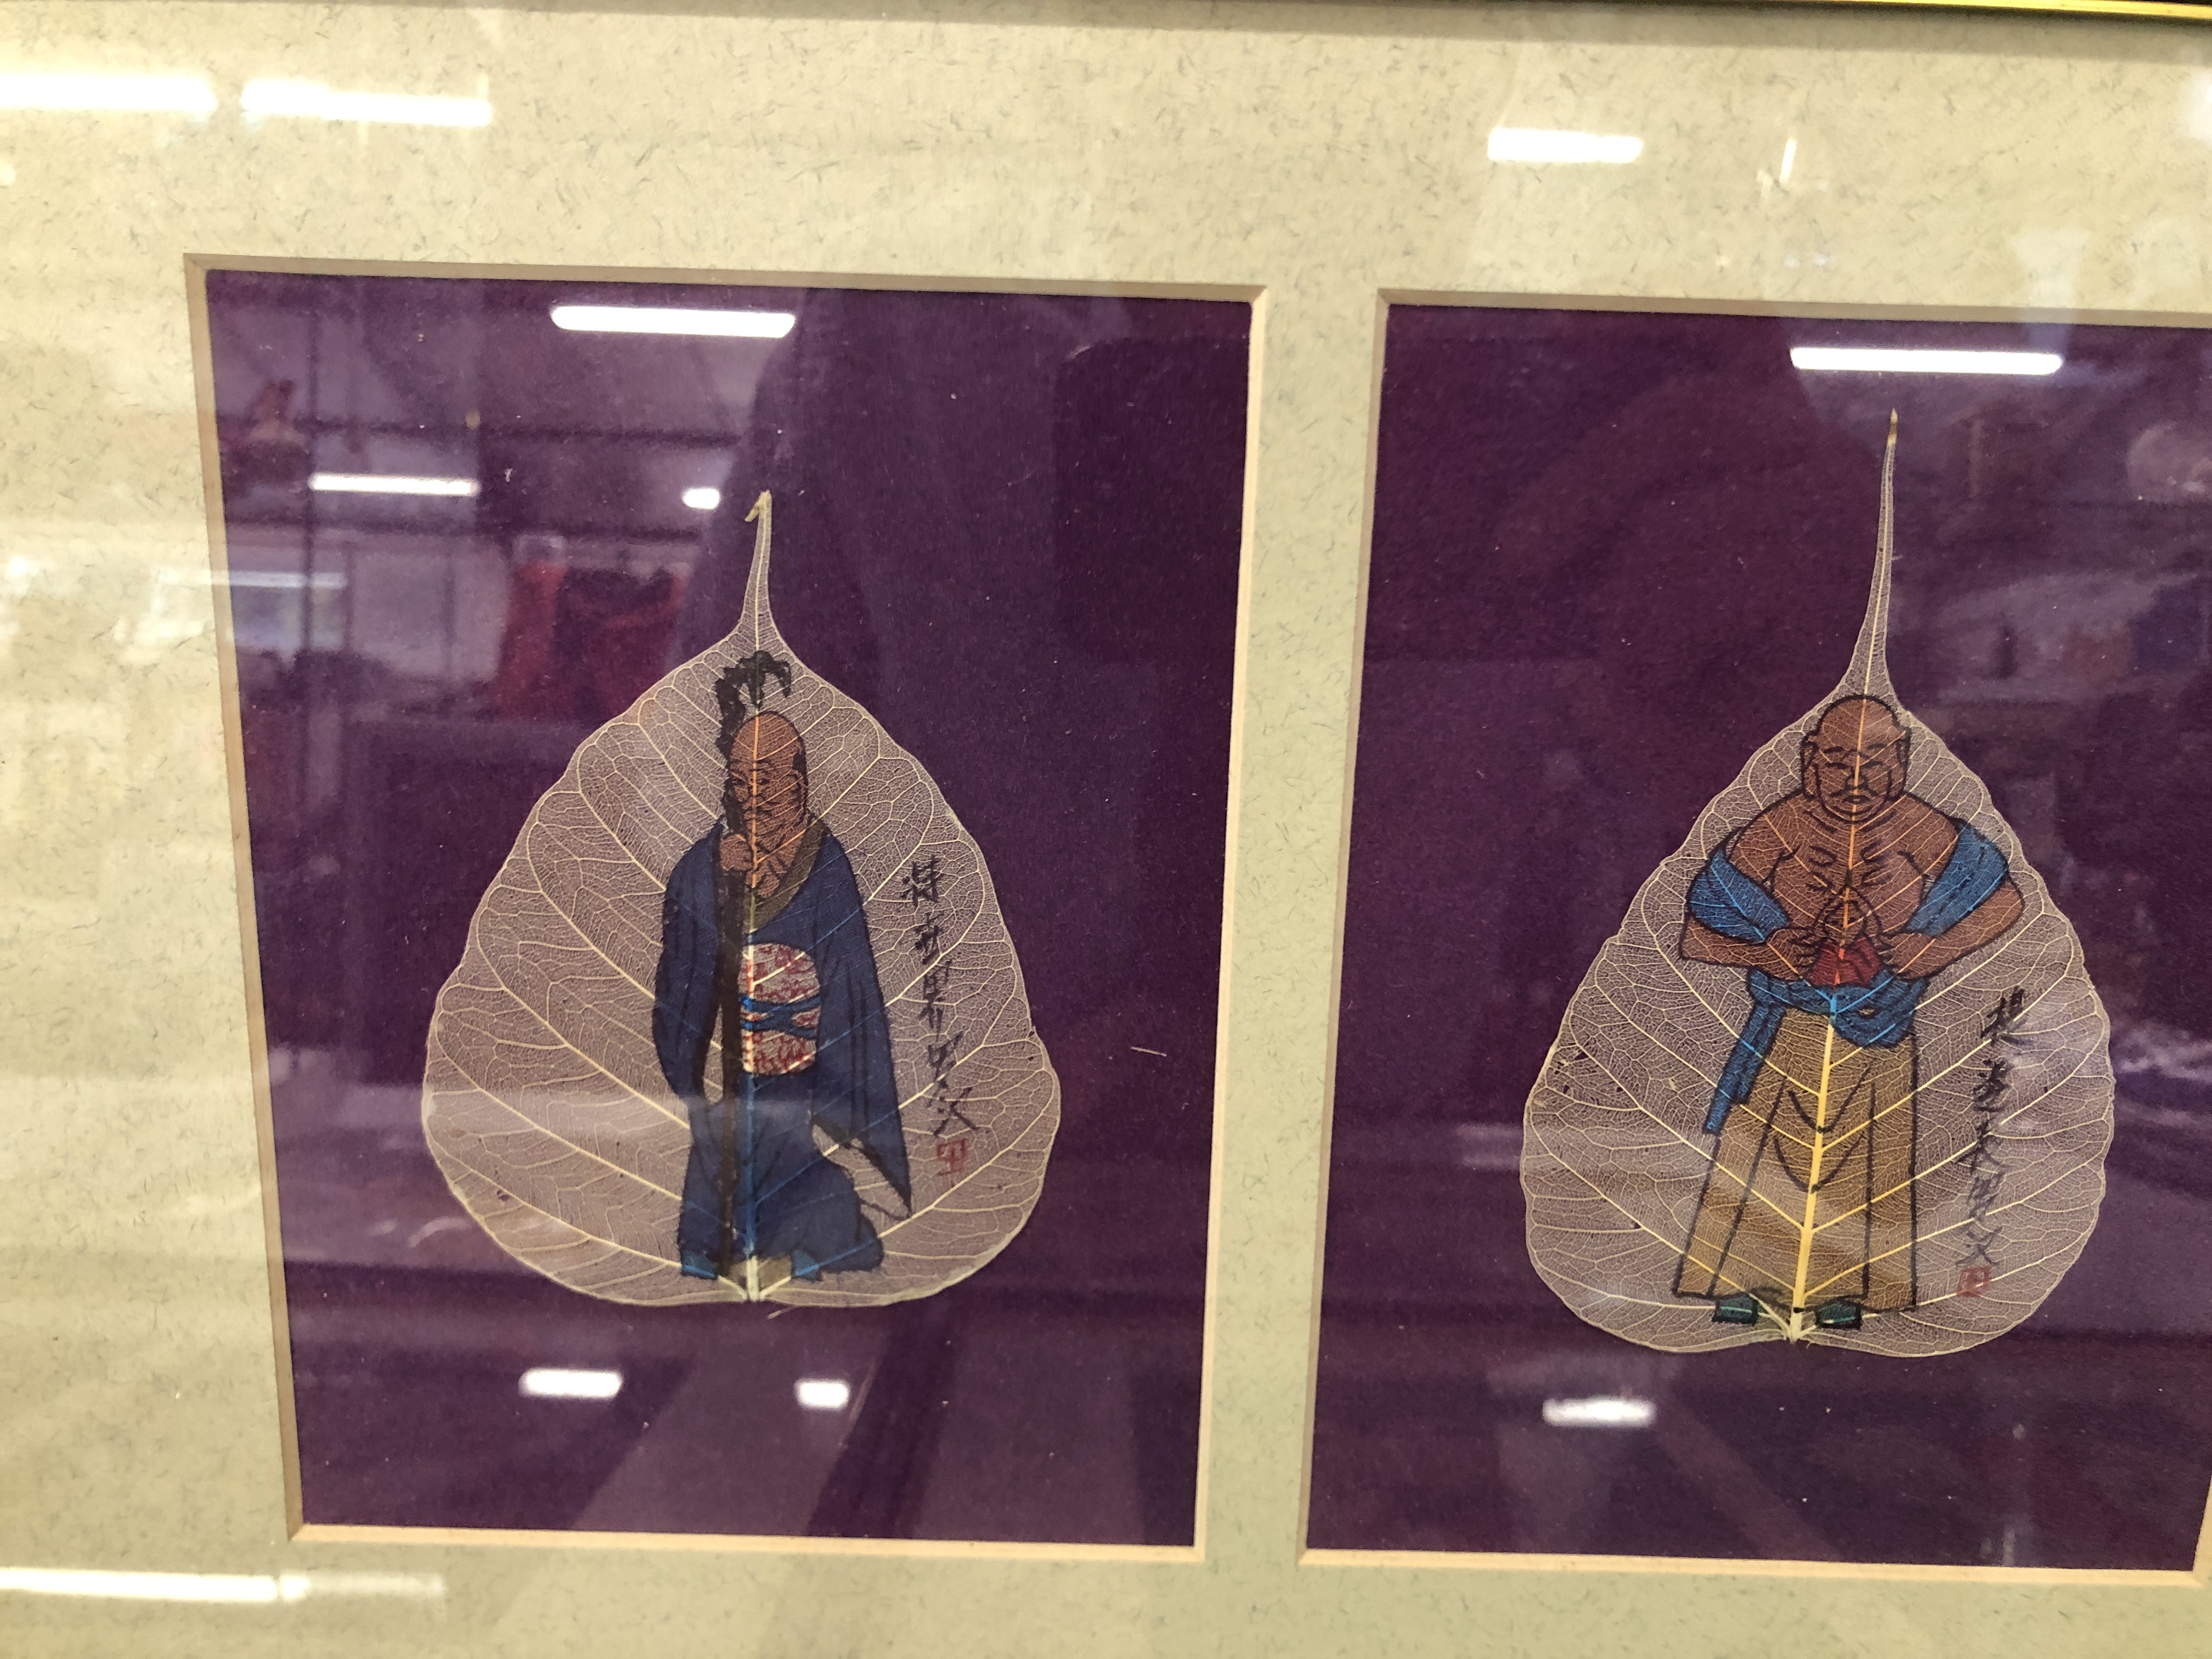 COLLECTION OF FRAMED HANDPAINTED LEAVES NINE IN TOTAL "LIU RONG TEMPLE" ALONG WITH A FRAMED - Image 4 of 12